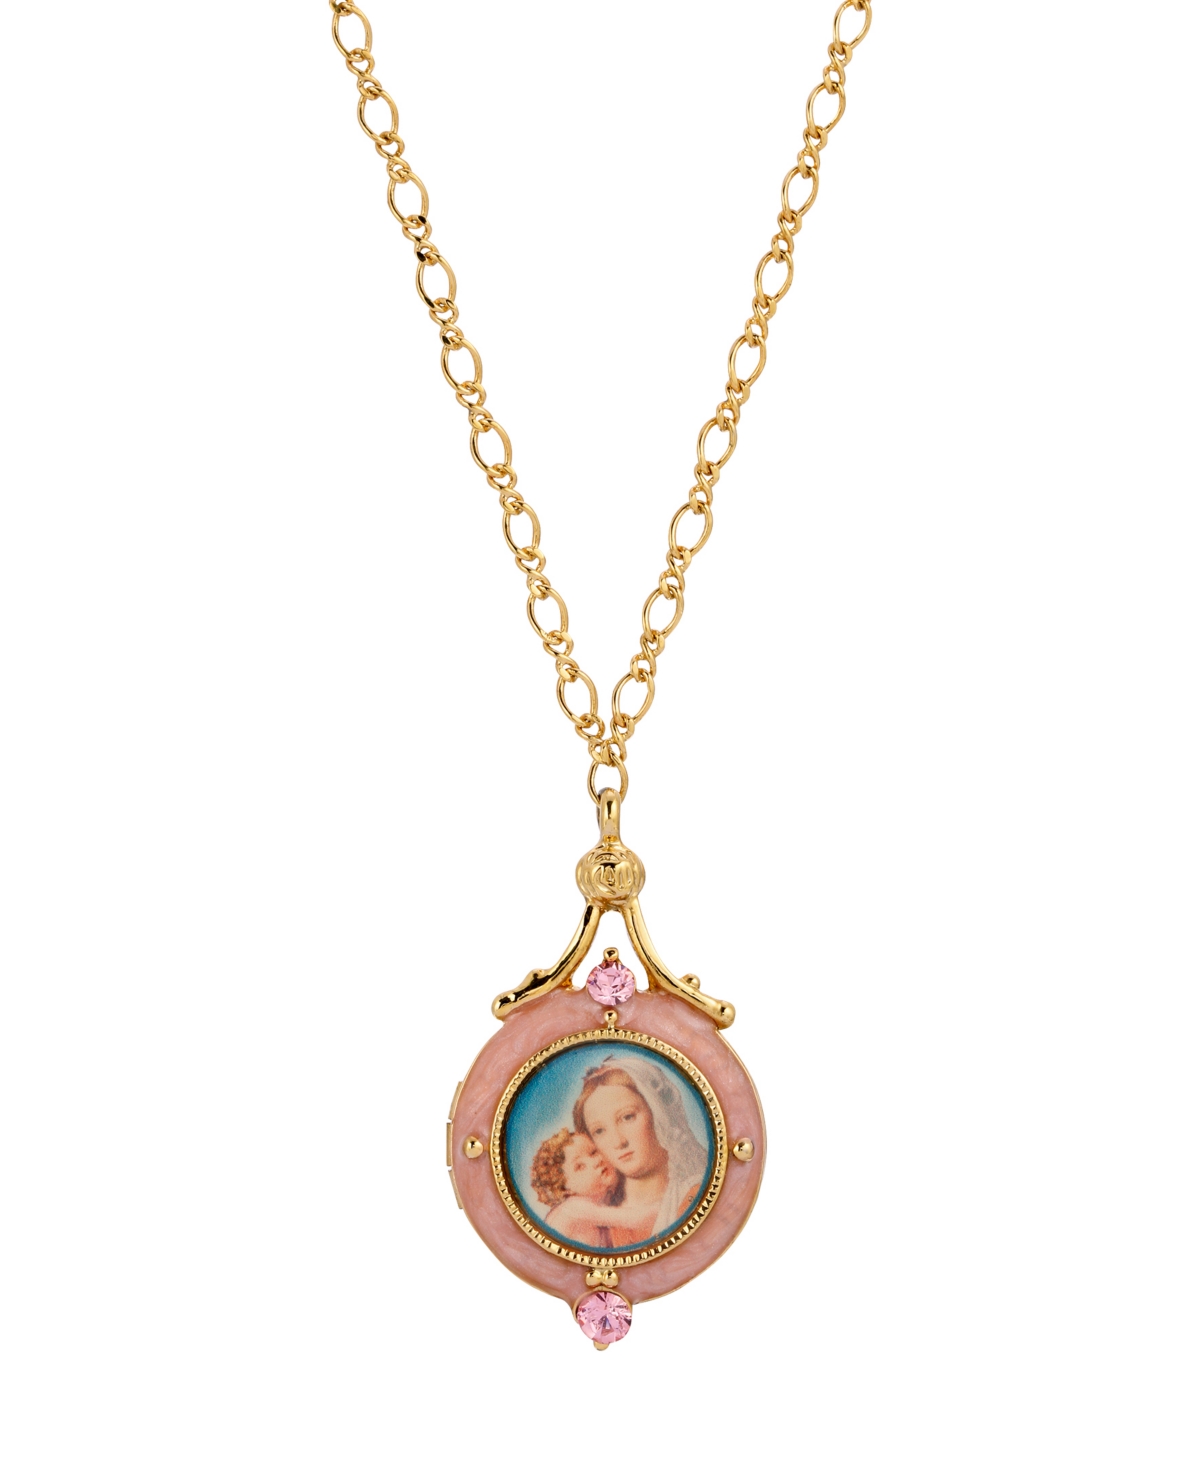 14K Gold-Dipped Pink Enamel Mary and Child Image Locket Necklace - Pink